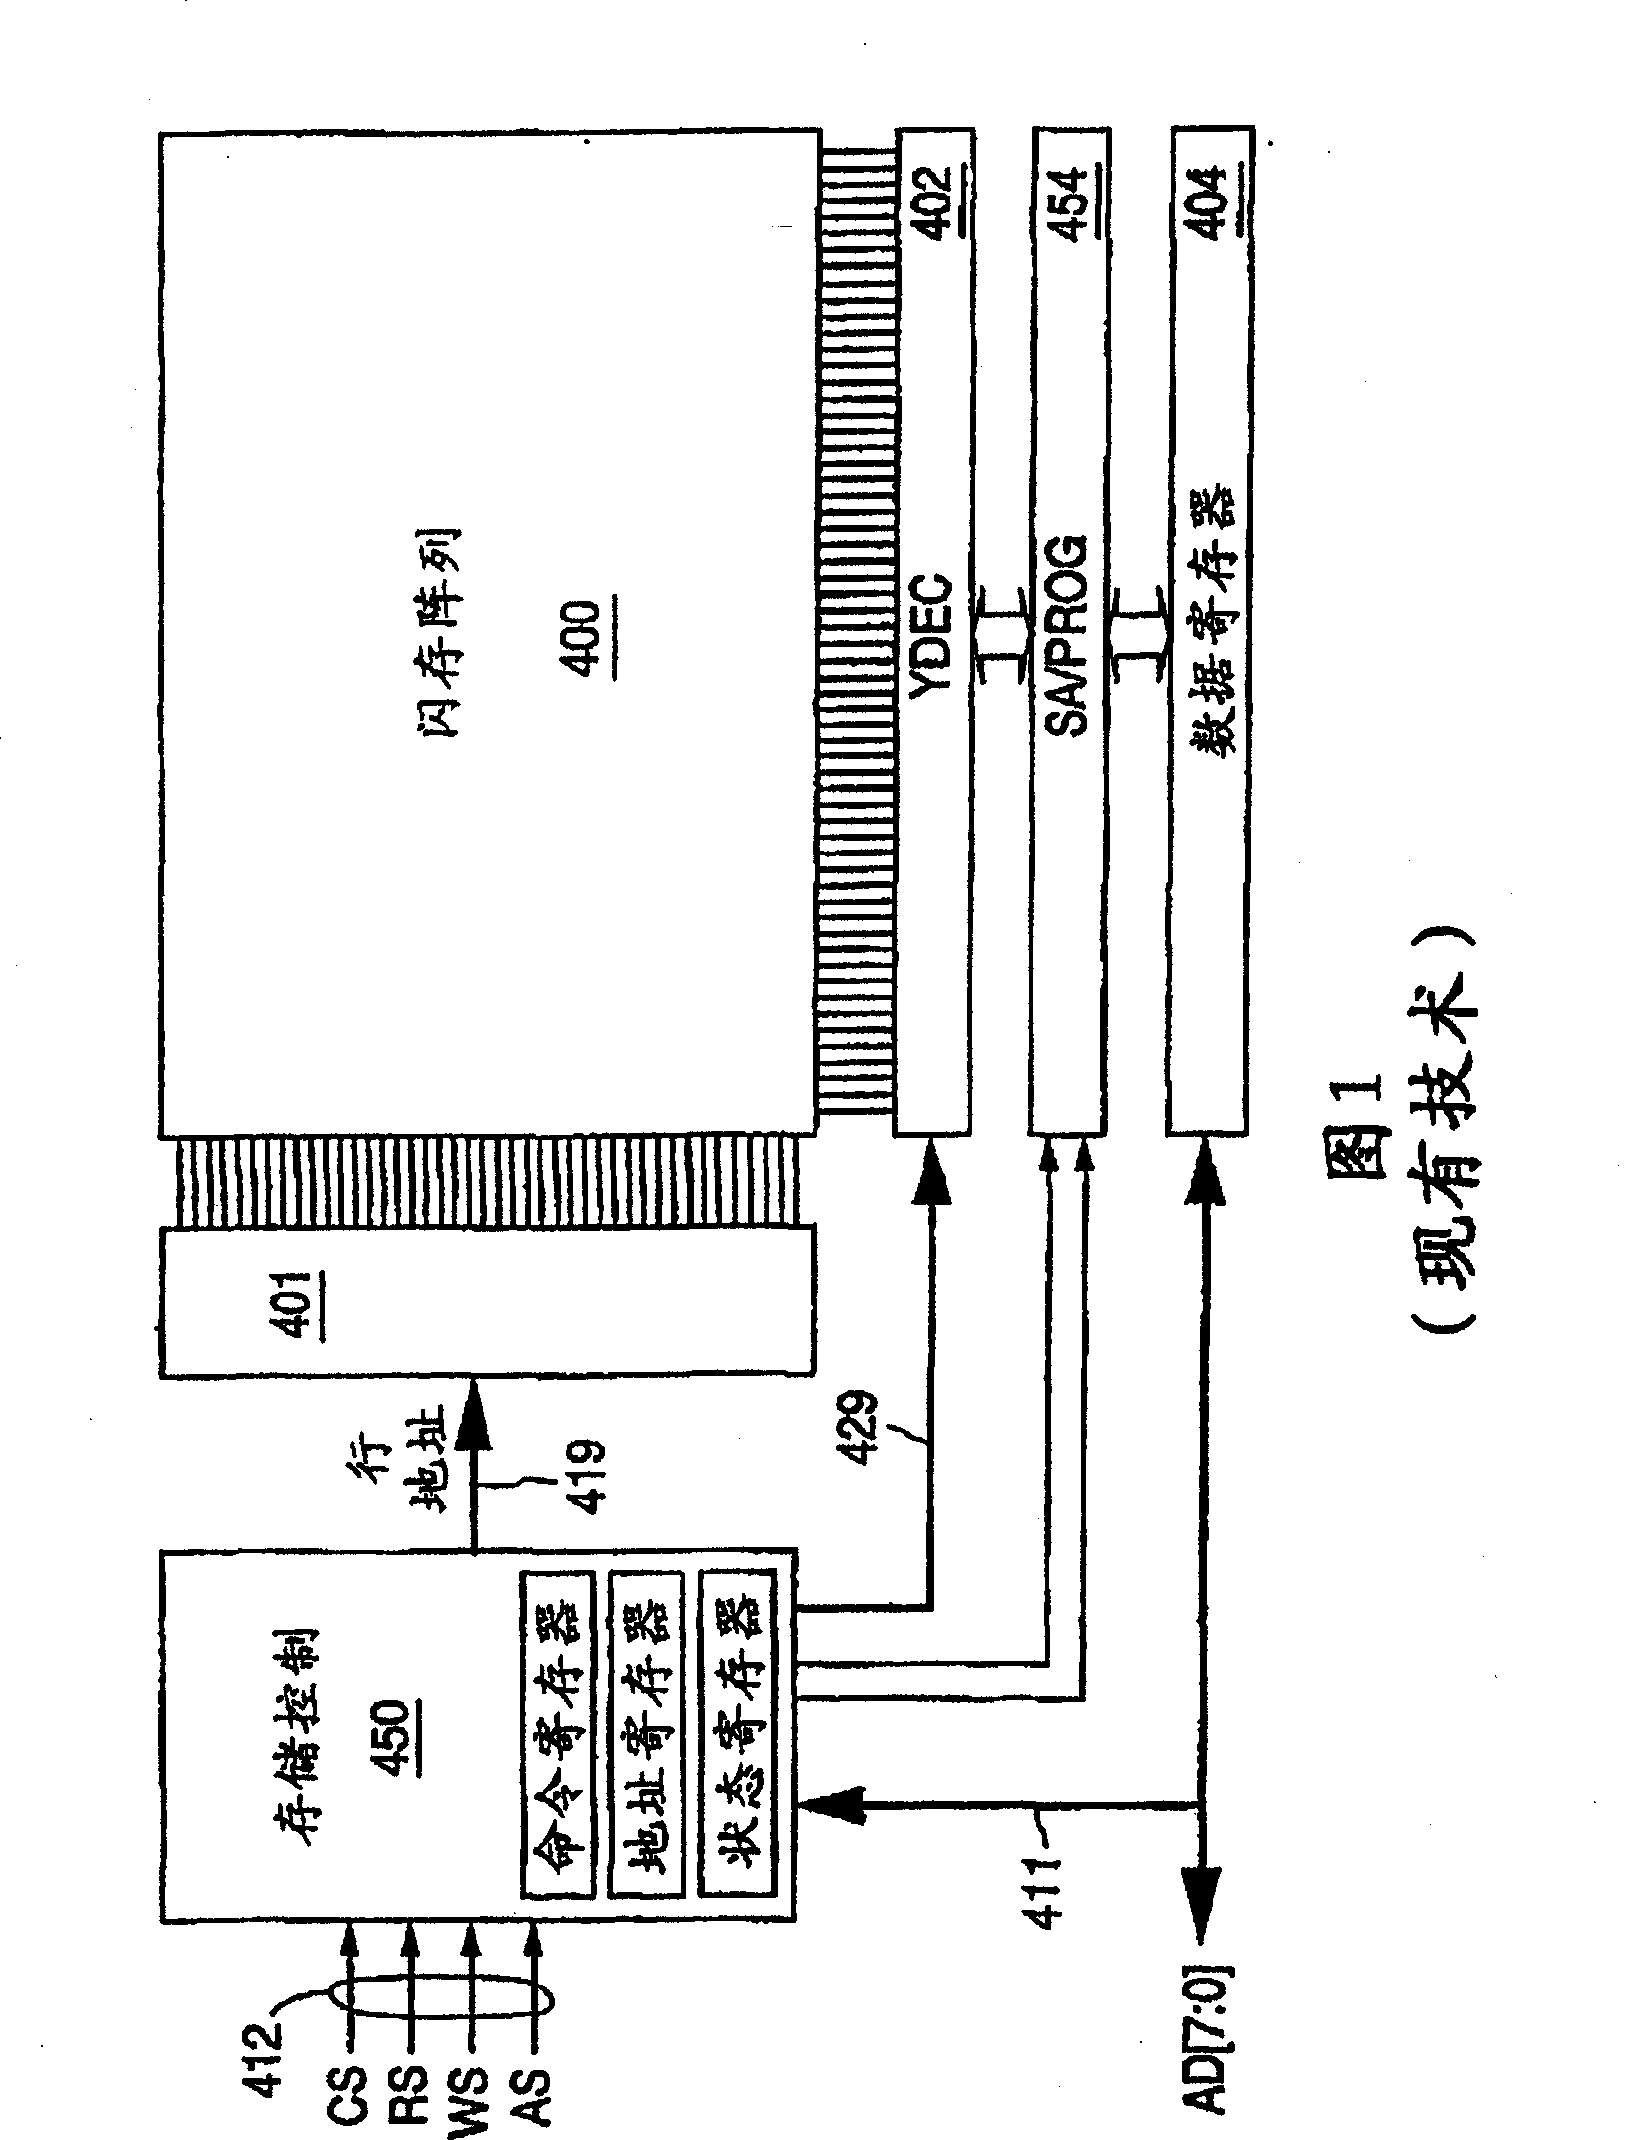 Non-volatile memory system and method for programming and reading update data